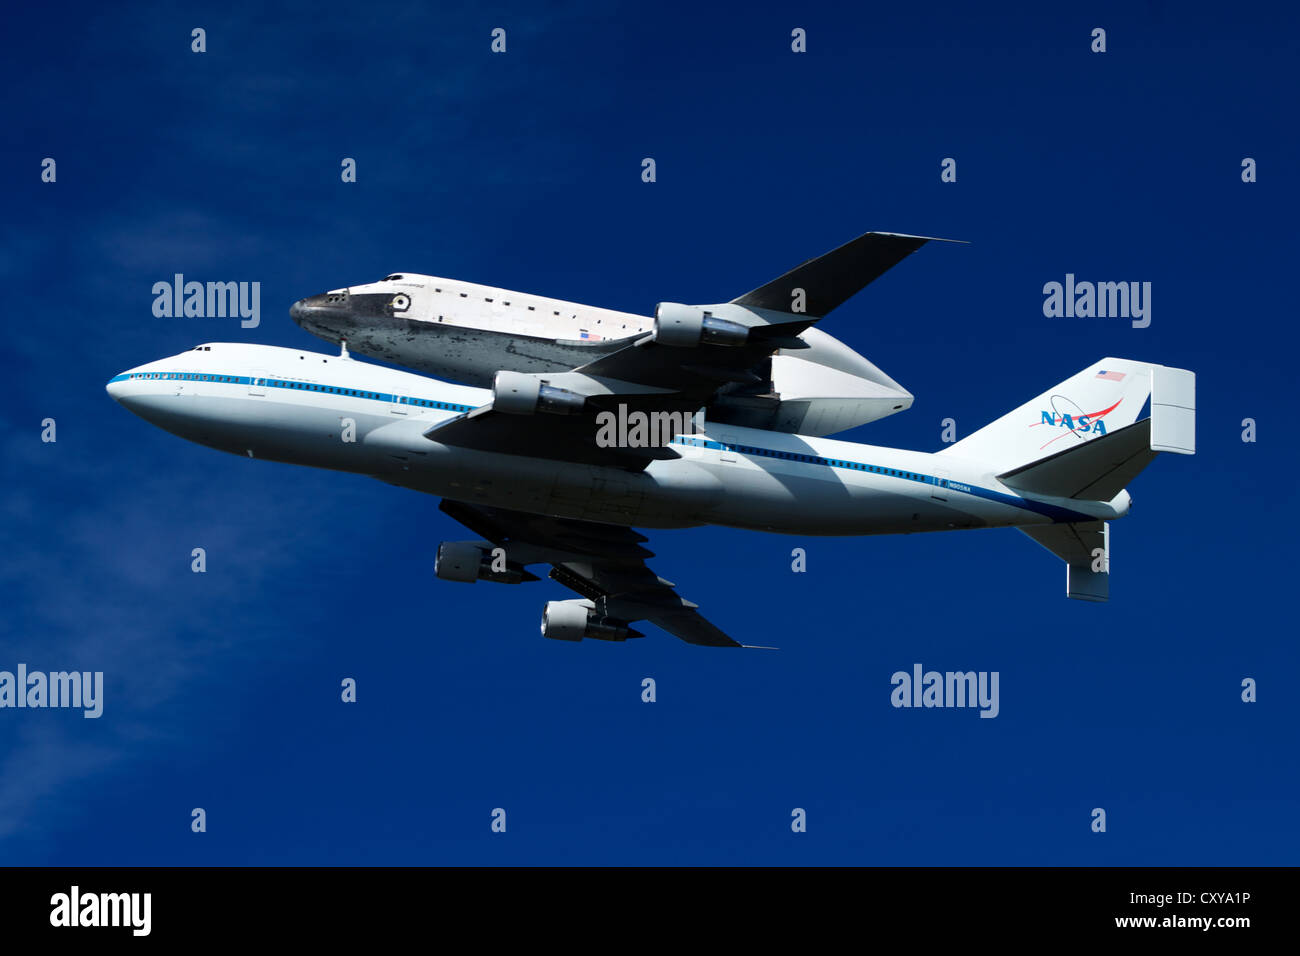 Space shuttle Endeavor on top on transporter plane on his way to museum. Stock Photo